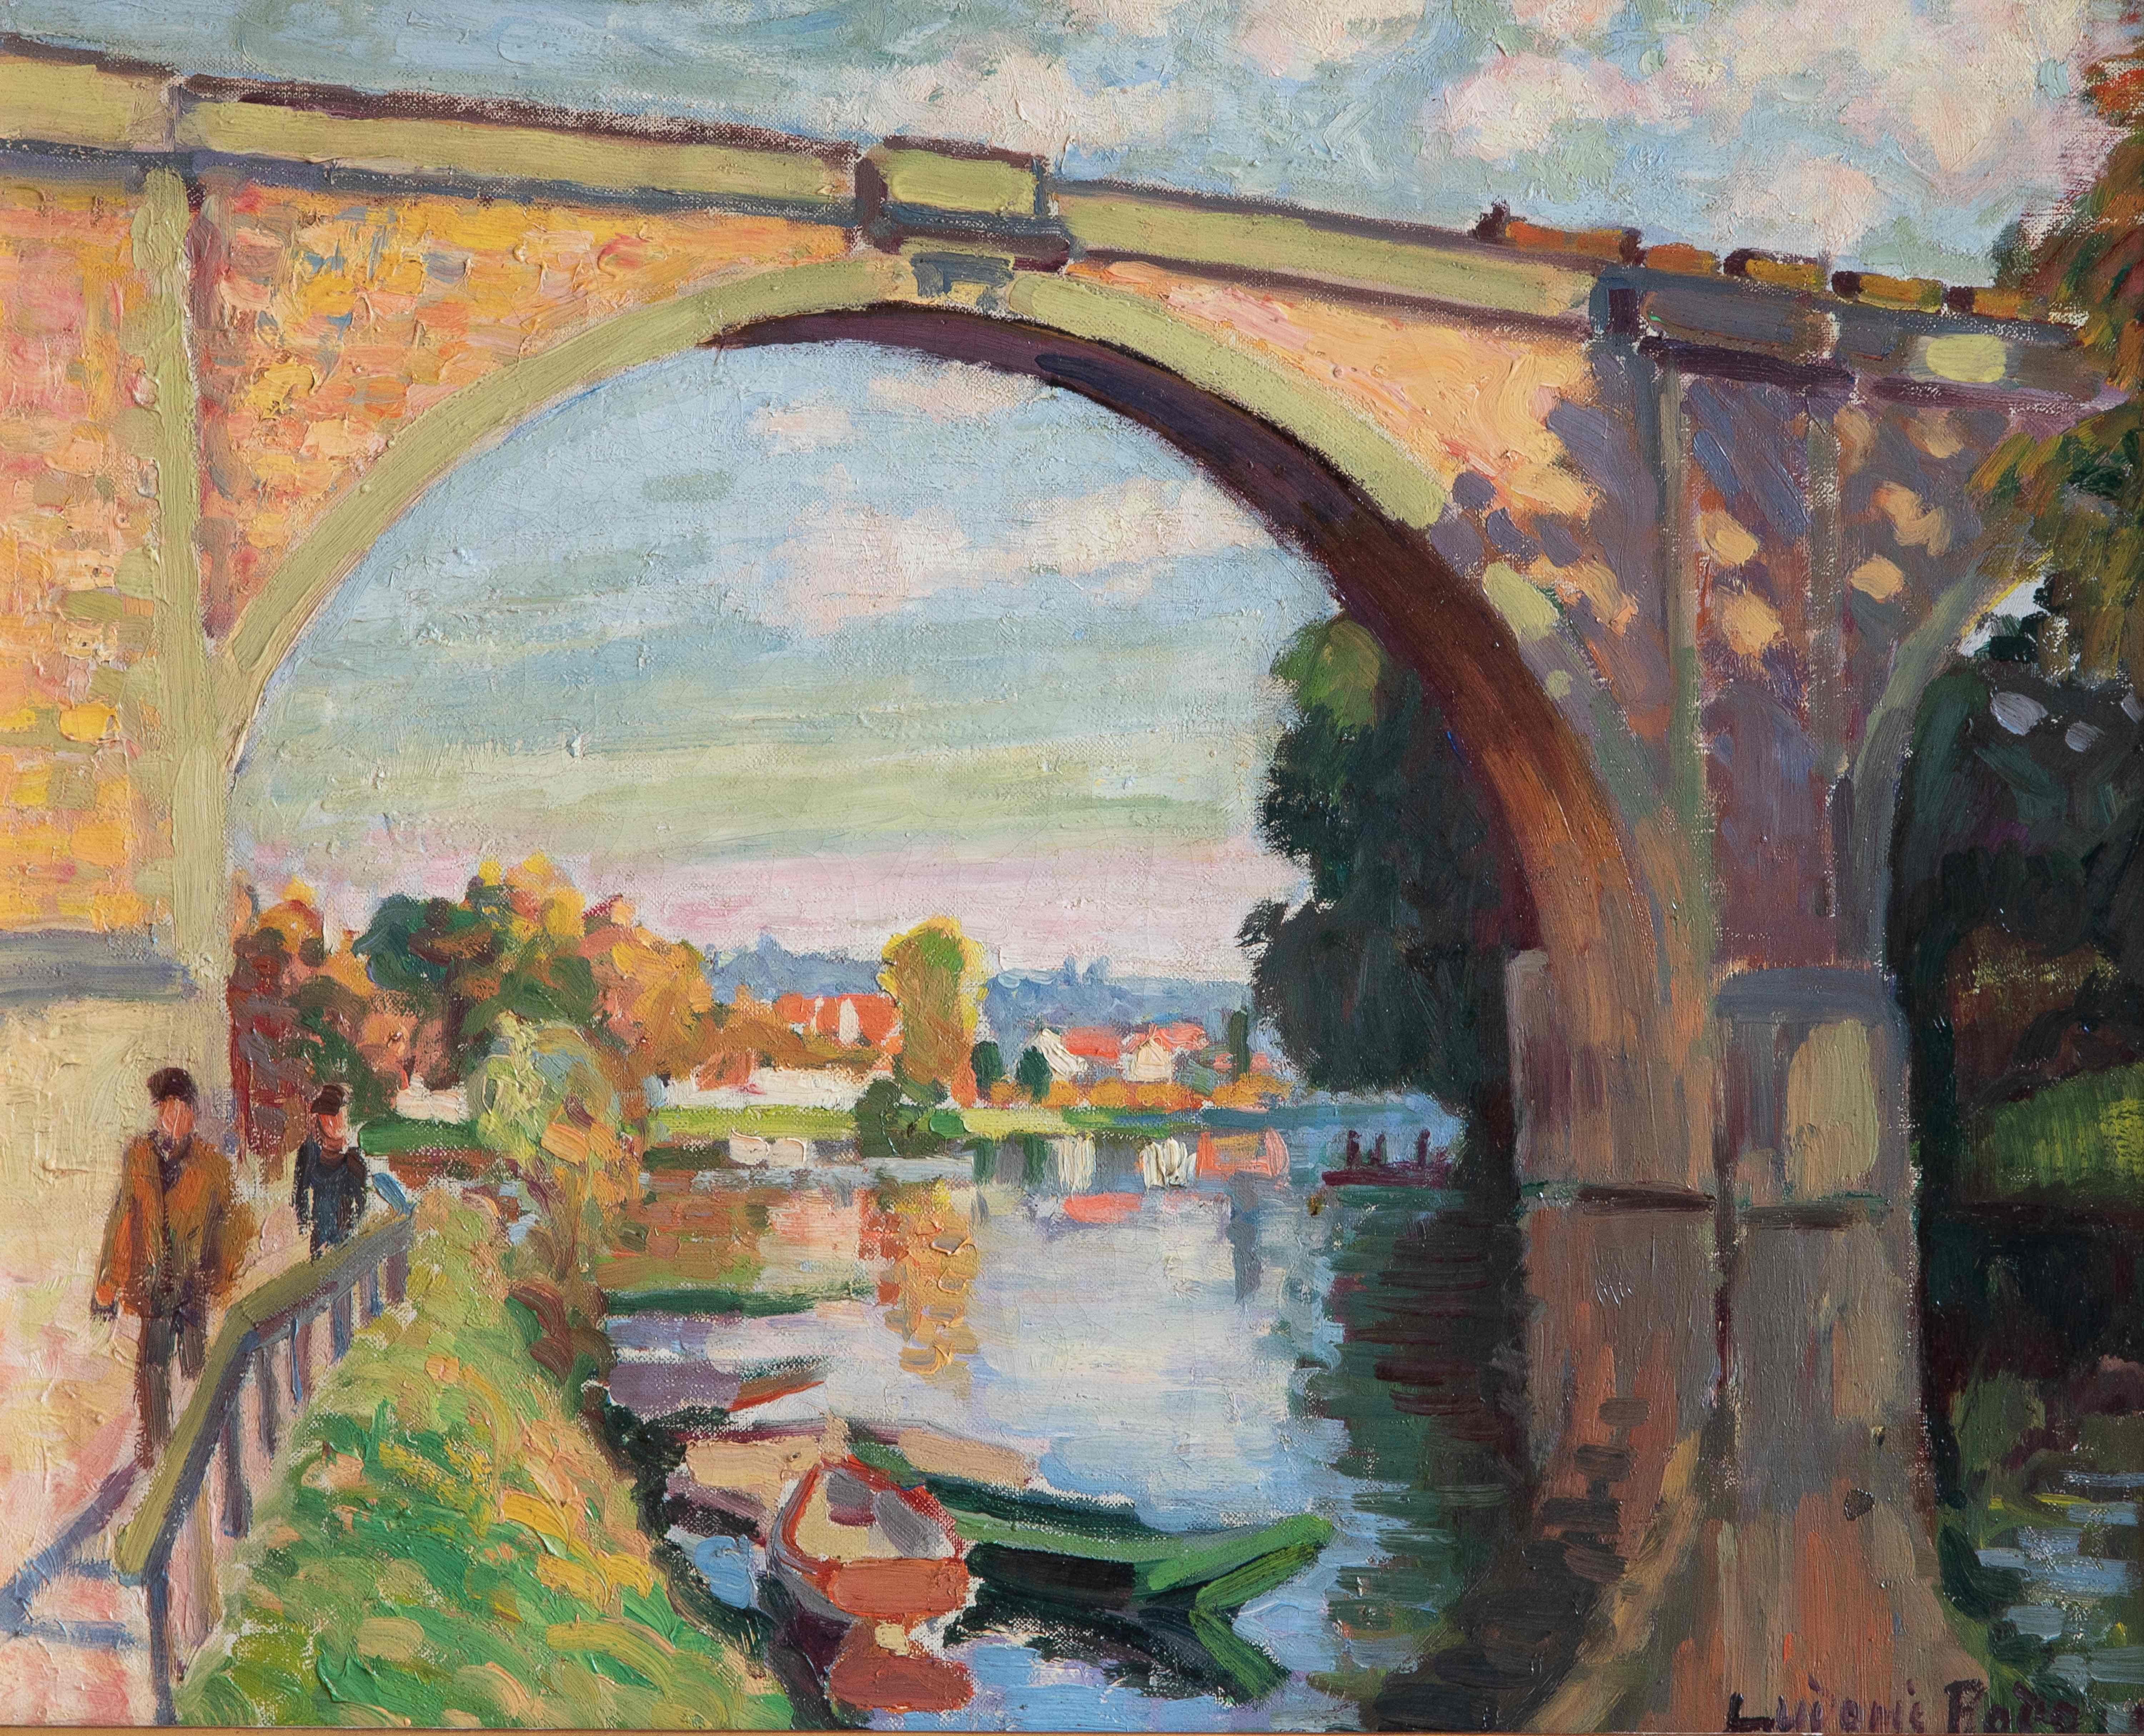 Railroad Bridge over the Marne at Joinville by Ludovic-Rodo Pissarro (1878-1952)
Oil on canvas
33 x 41 cm (13 x 16 ¹/₈ inches)
Signed lower right, Ludovic Rodo. 
Executed circa 1905

This work is accompanied by a certificate of authenticity from